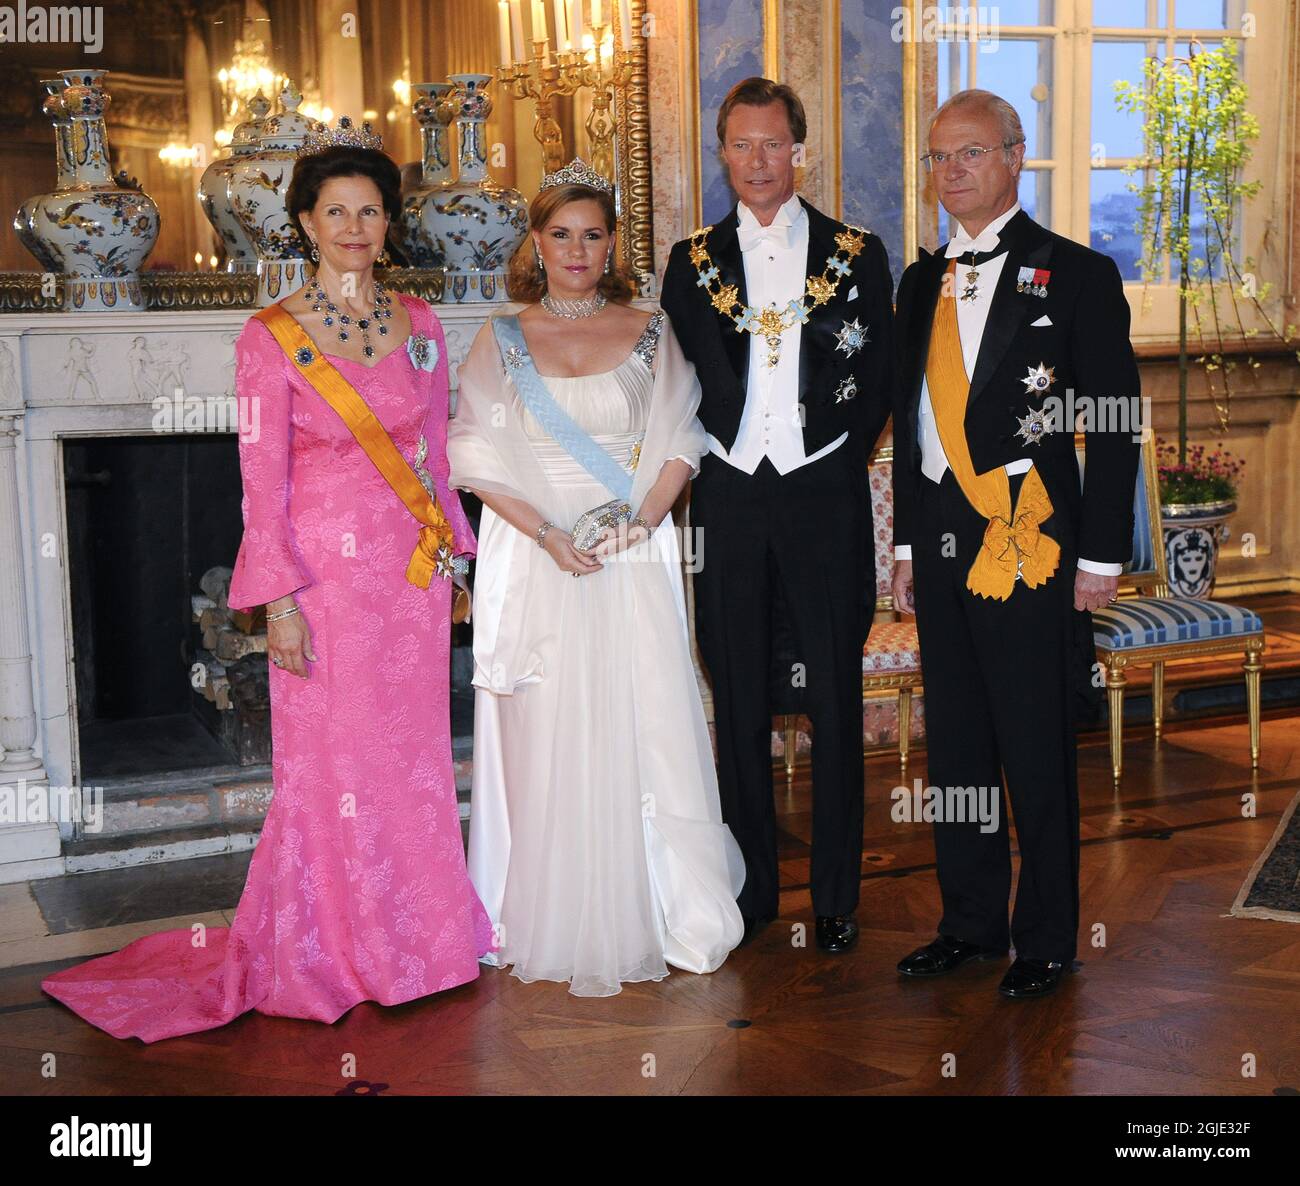 Queen Silvia (L) of Sweden, Grand Duchess Maria Teresa (2nd L) and Grand Duke Henri (3rd L) of Luxembourg and King Carl XVI Gustaf (R) of Sweden poses for photographers as they arrive to a gala banquet held for the Grand Duke and the Grand Duchess of Luxembourg at the Royal Palace in Stockholm, Sweden. Stock Photo